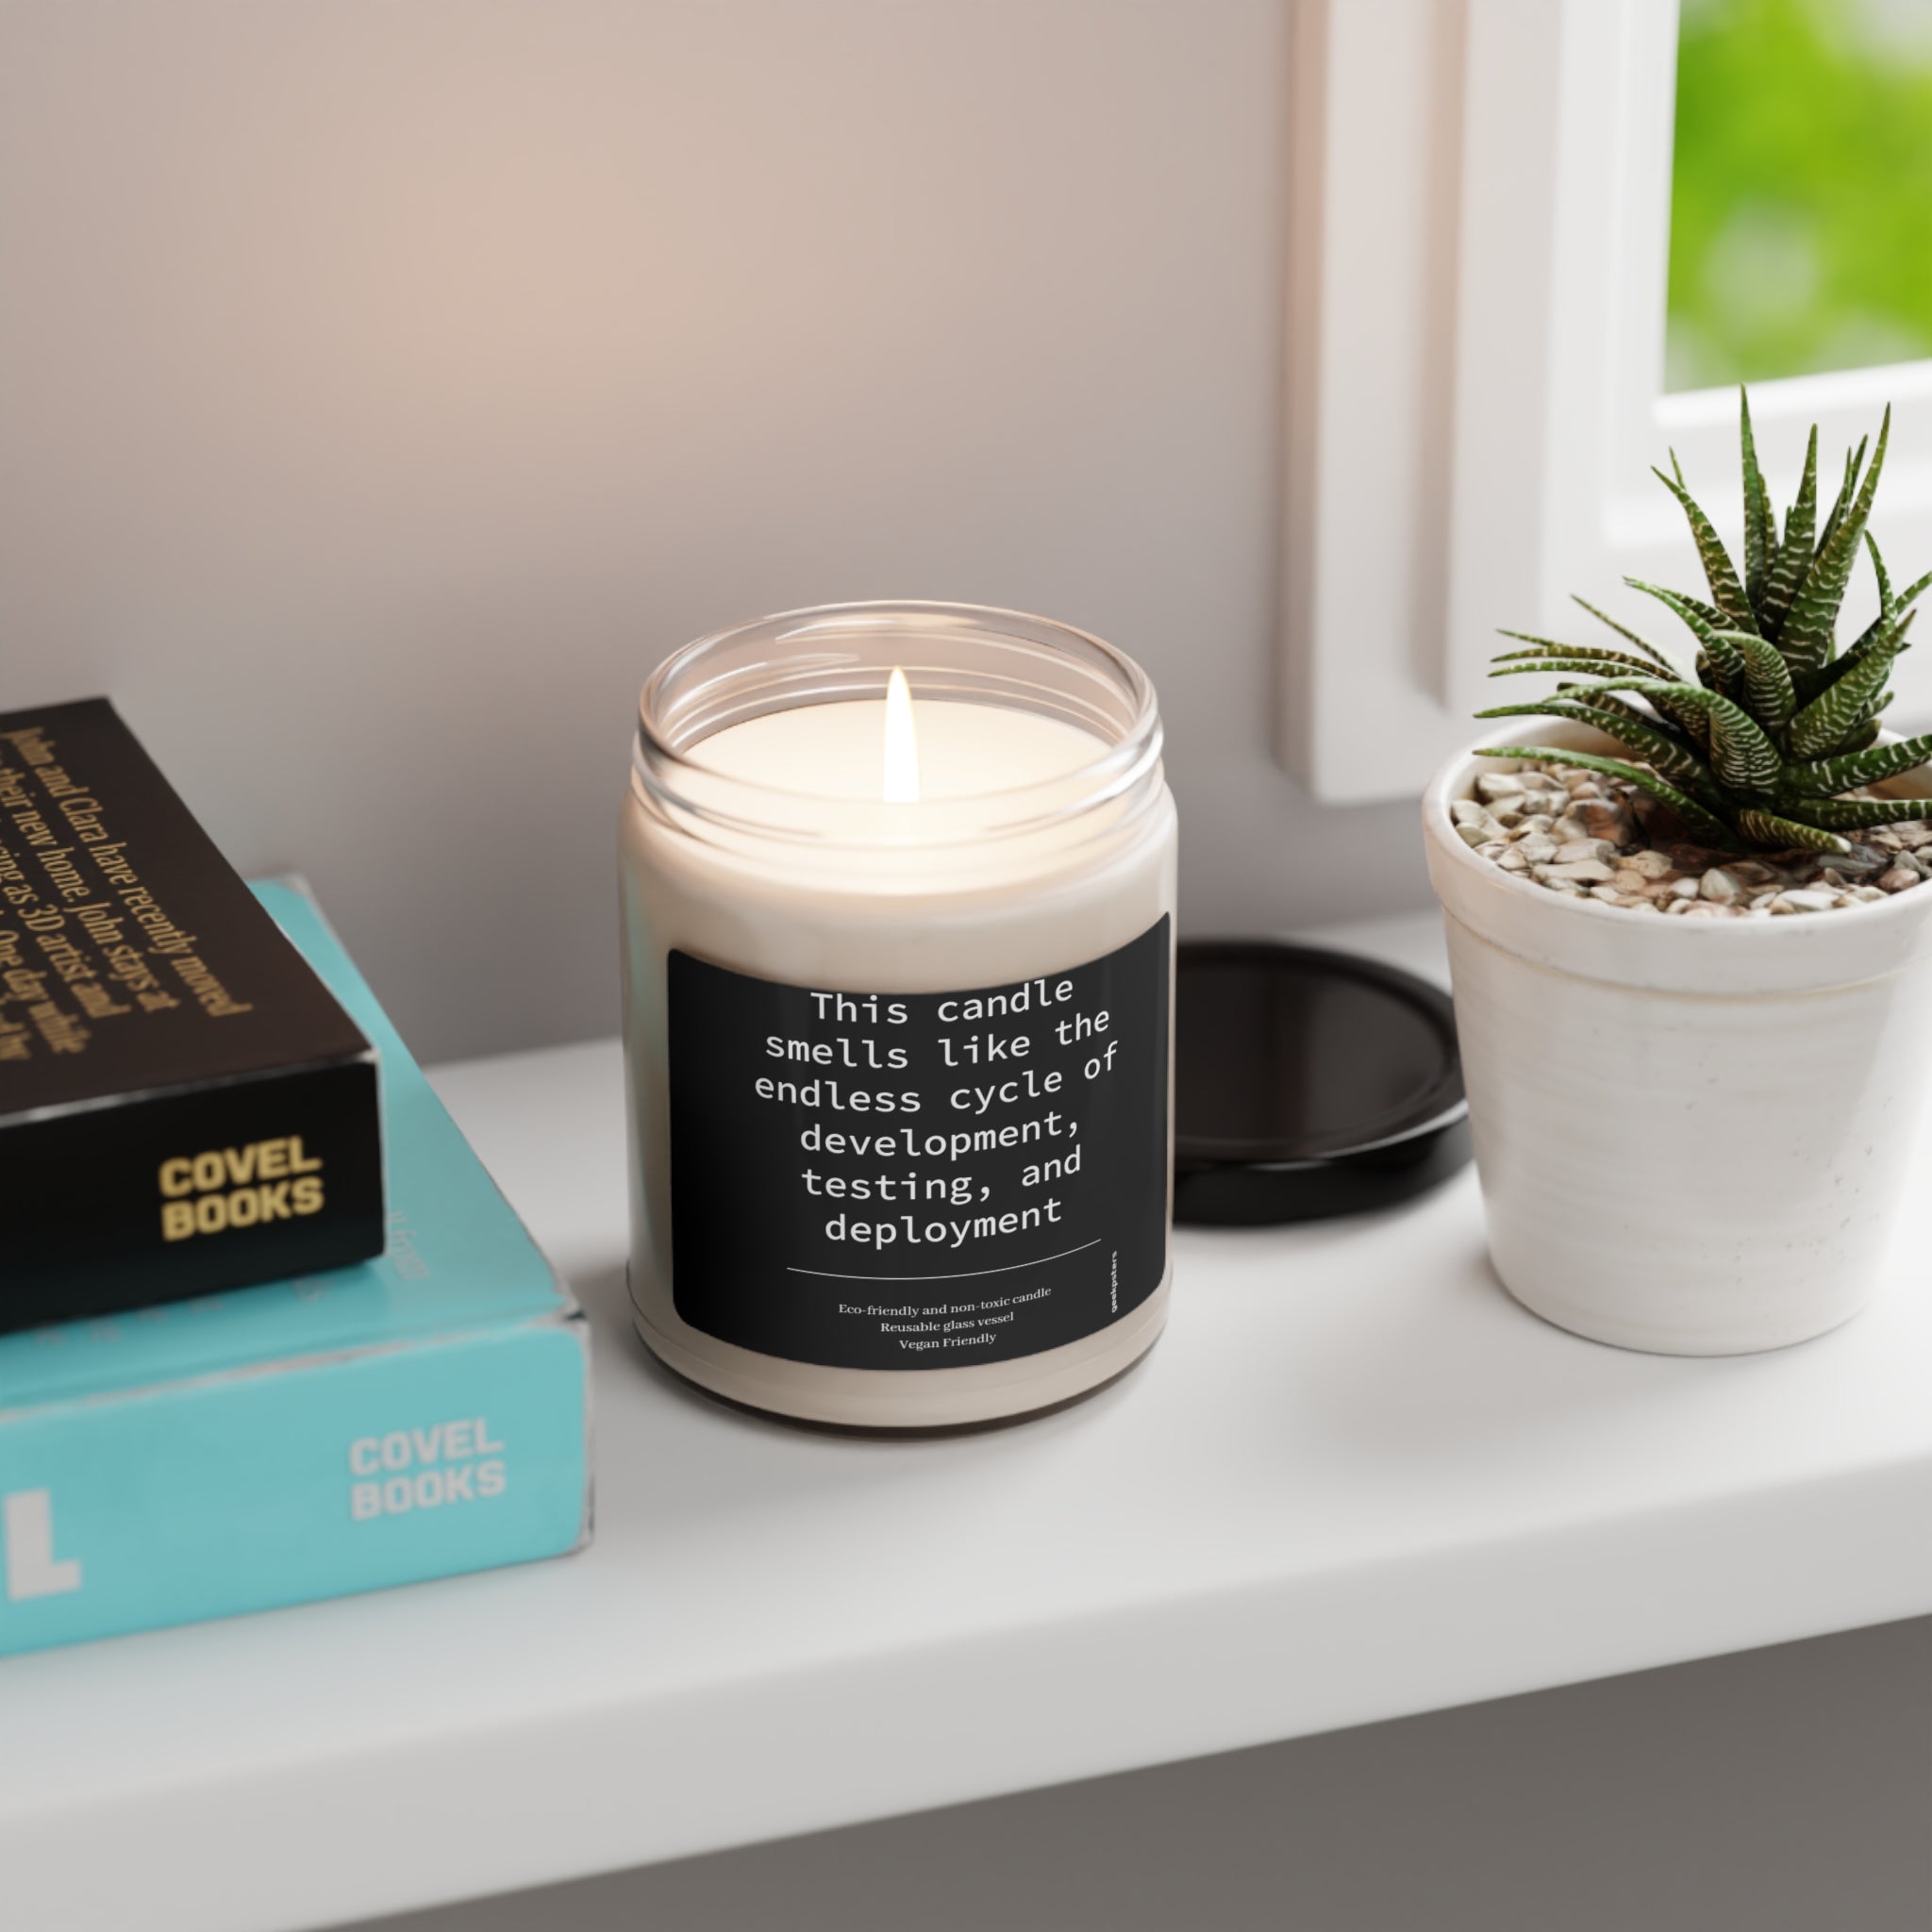 A This Candle Smells Like the Endless Cycle of Development, Testing and Deployment candle on a windowsill next to a stack of books and a potted succulent, with a humorous label about the endless cycle of development.